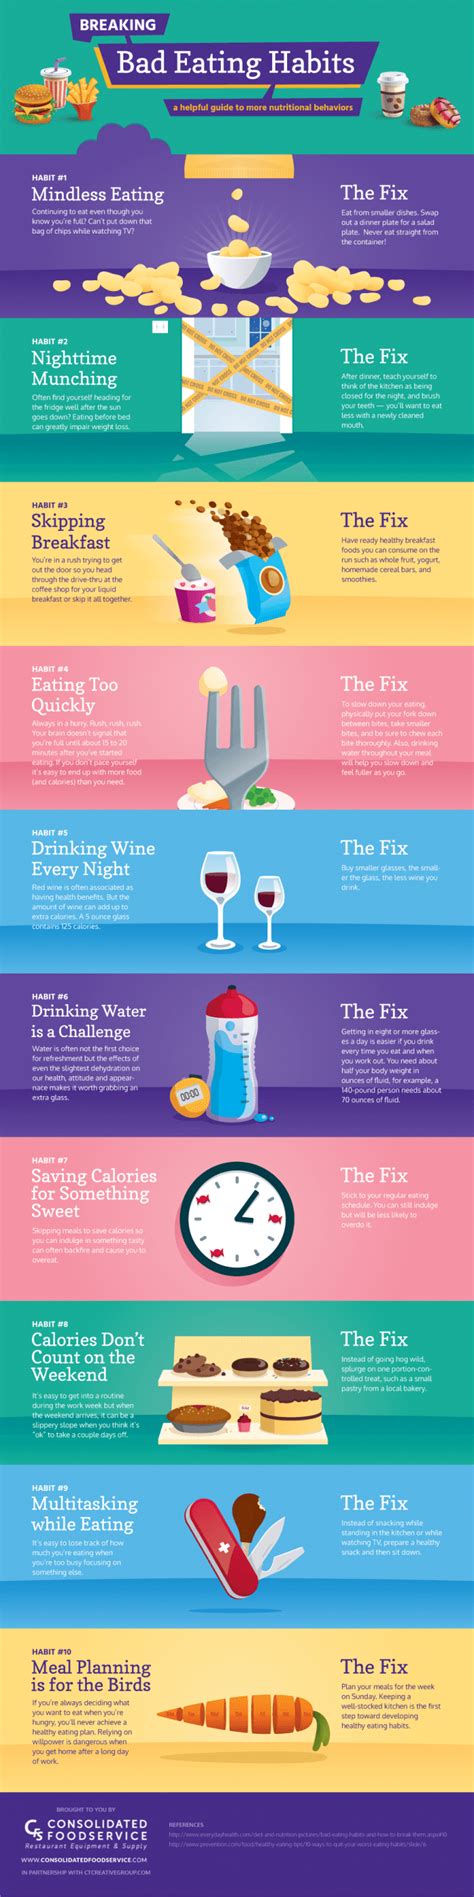 How To Break Bad Eating Habits Daily Infographic